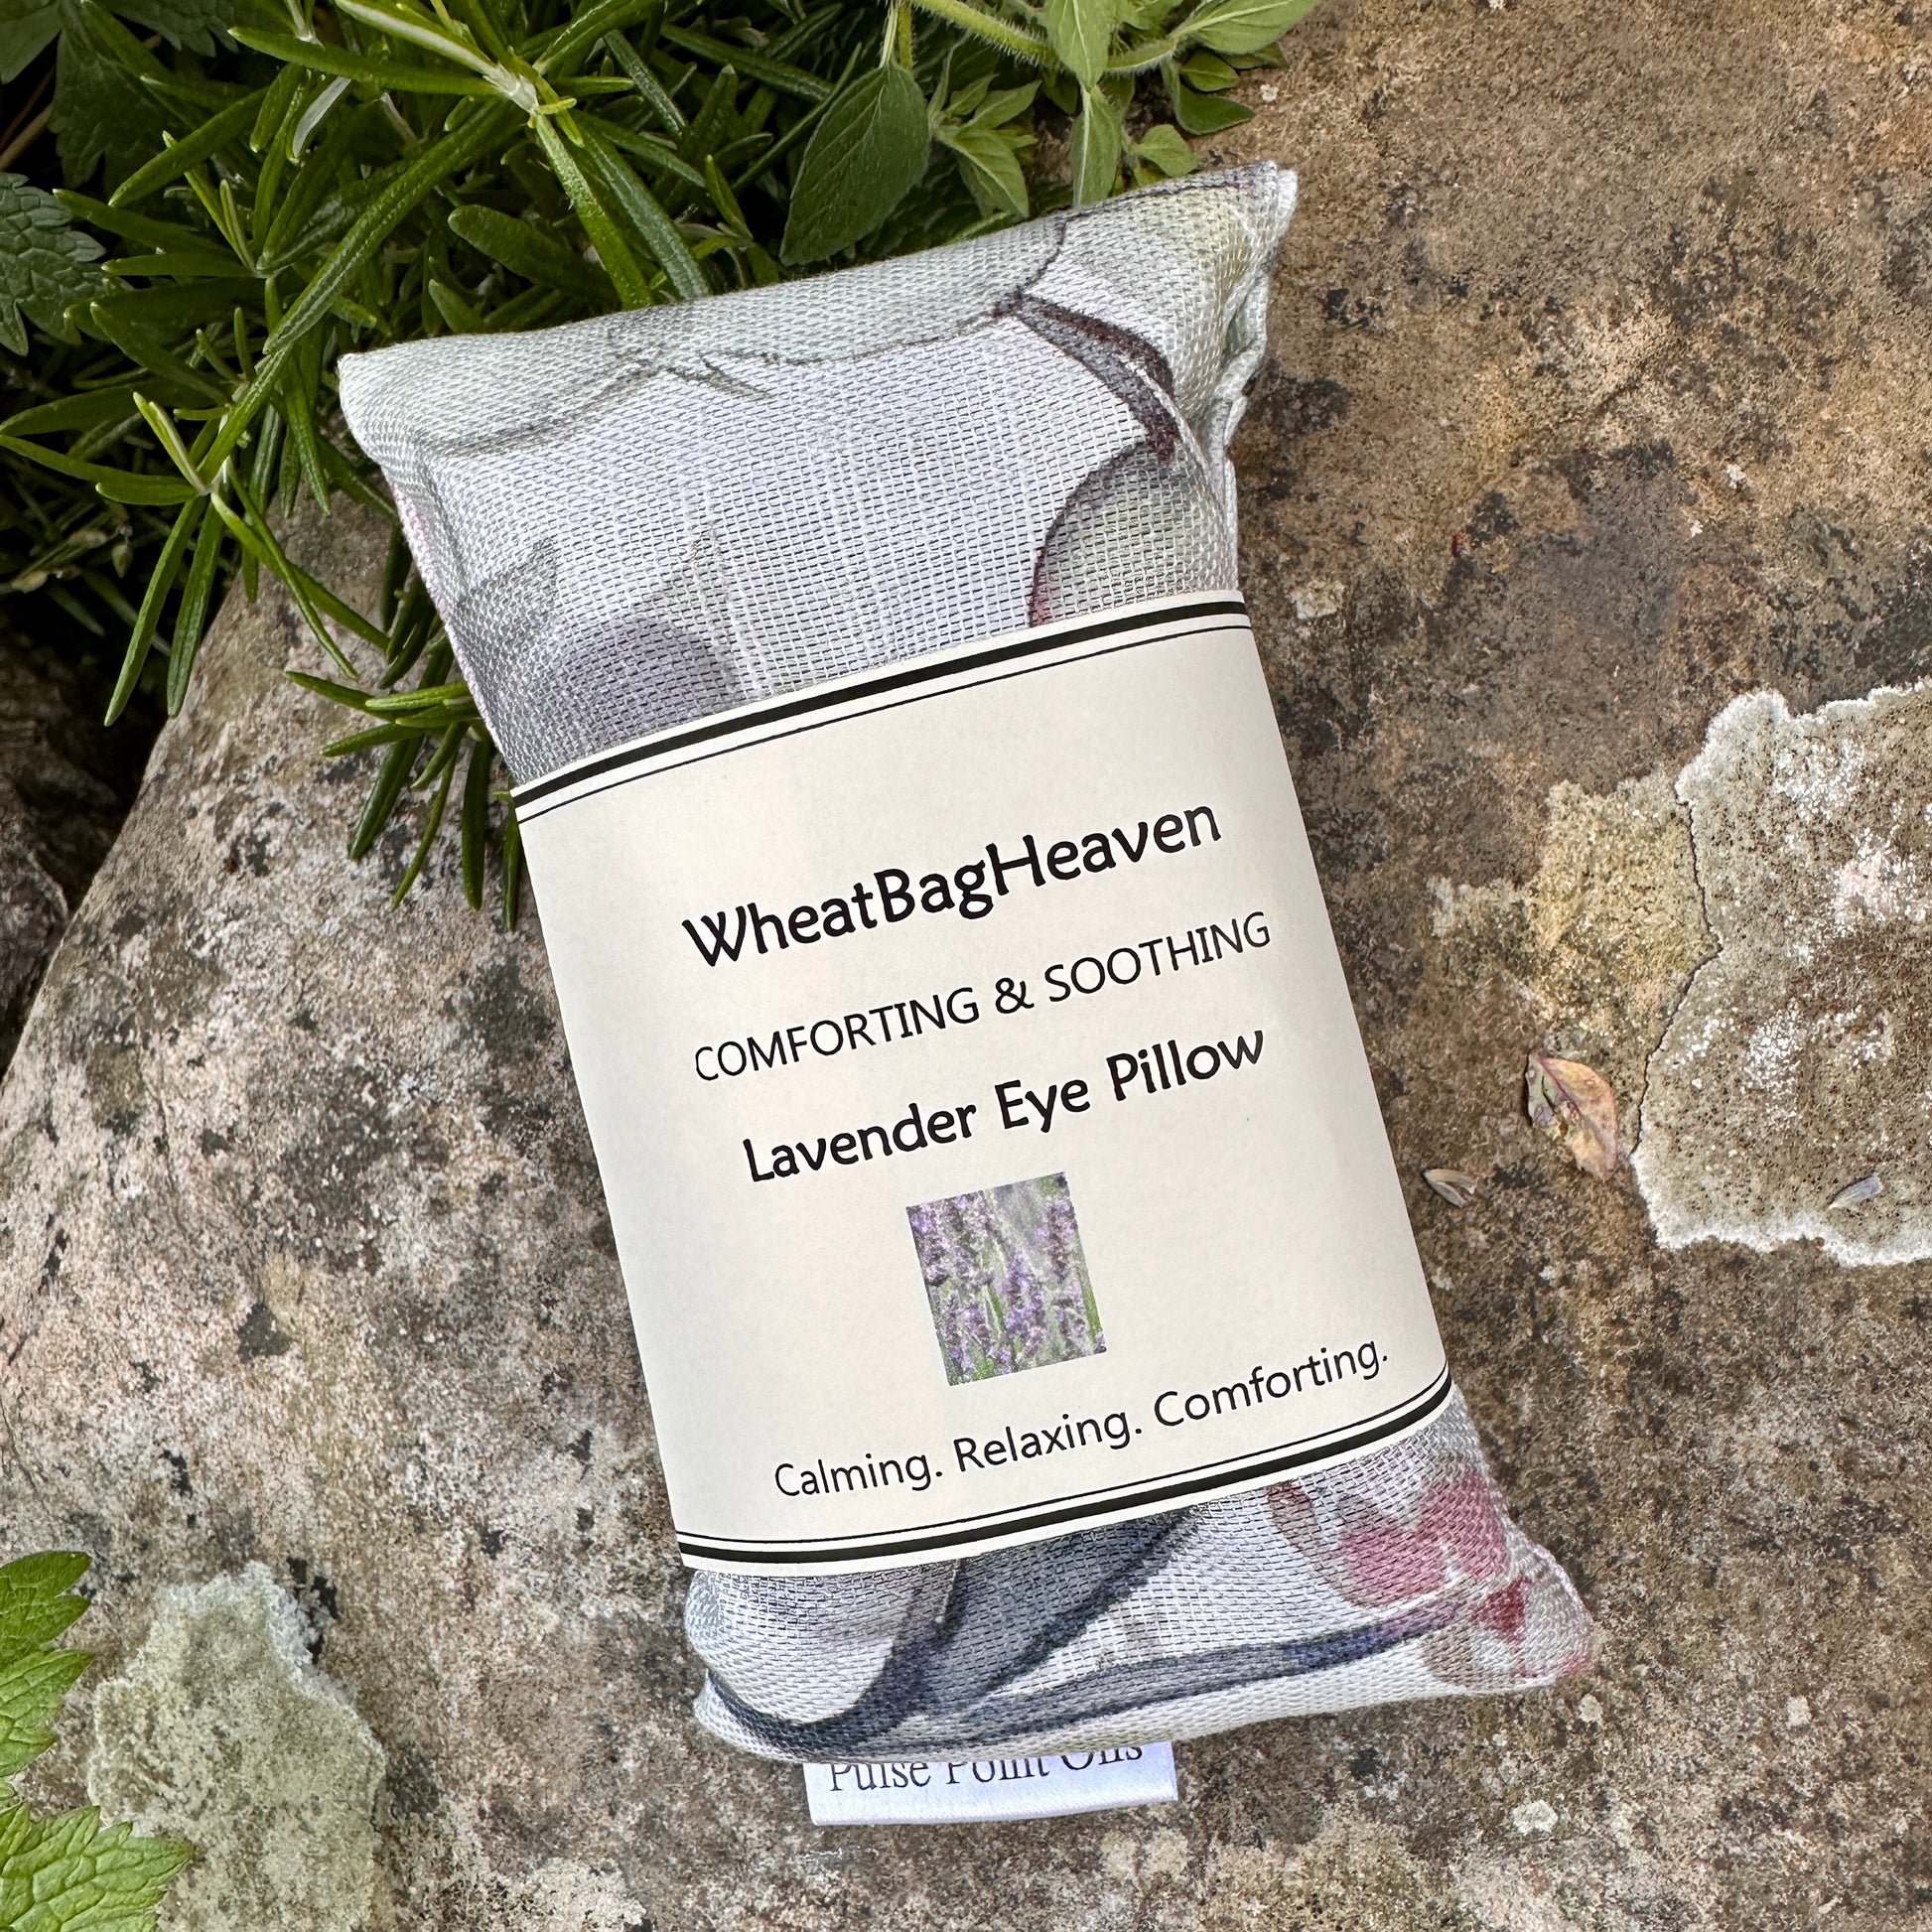 Heated Body wrap, lavender scented wheat bag in botanical print. Gardeners heating pad gift